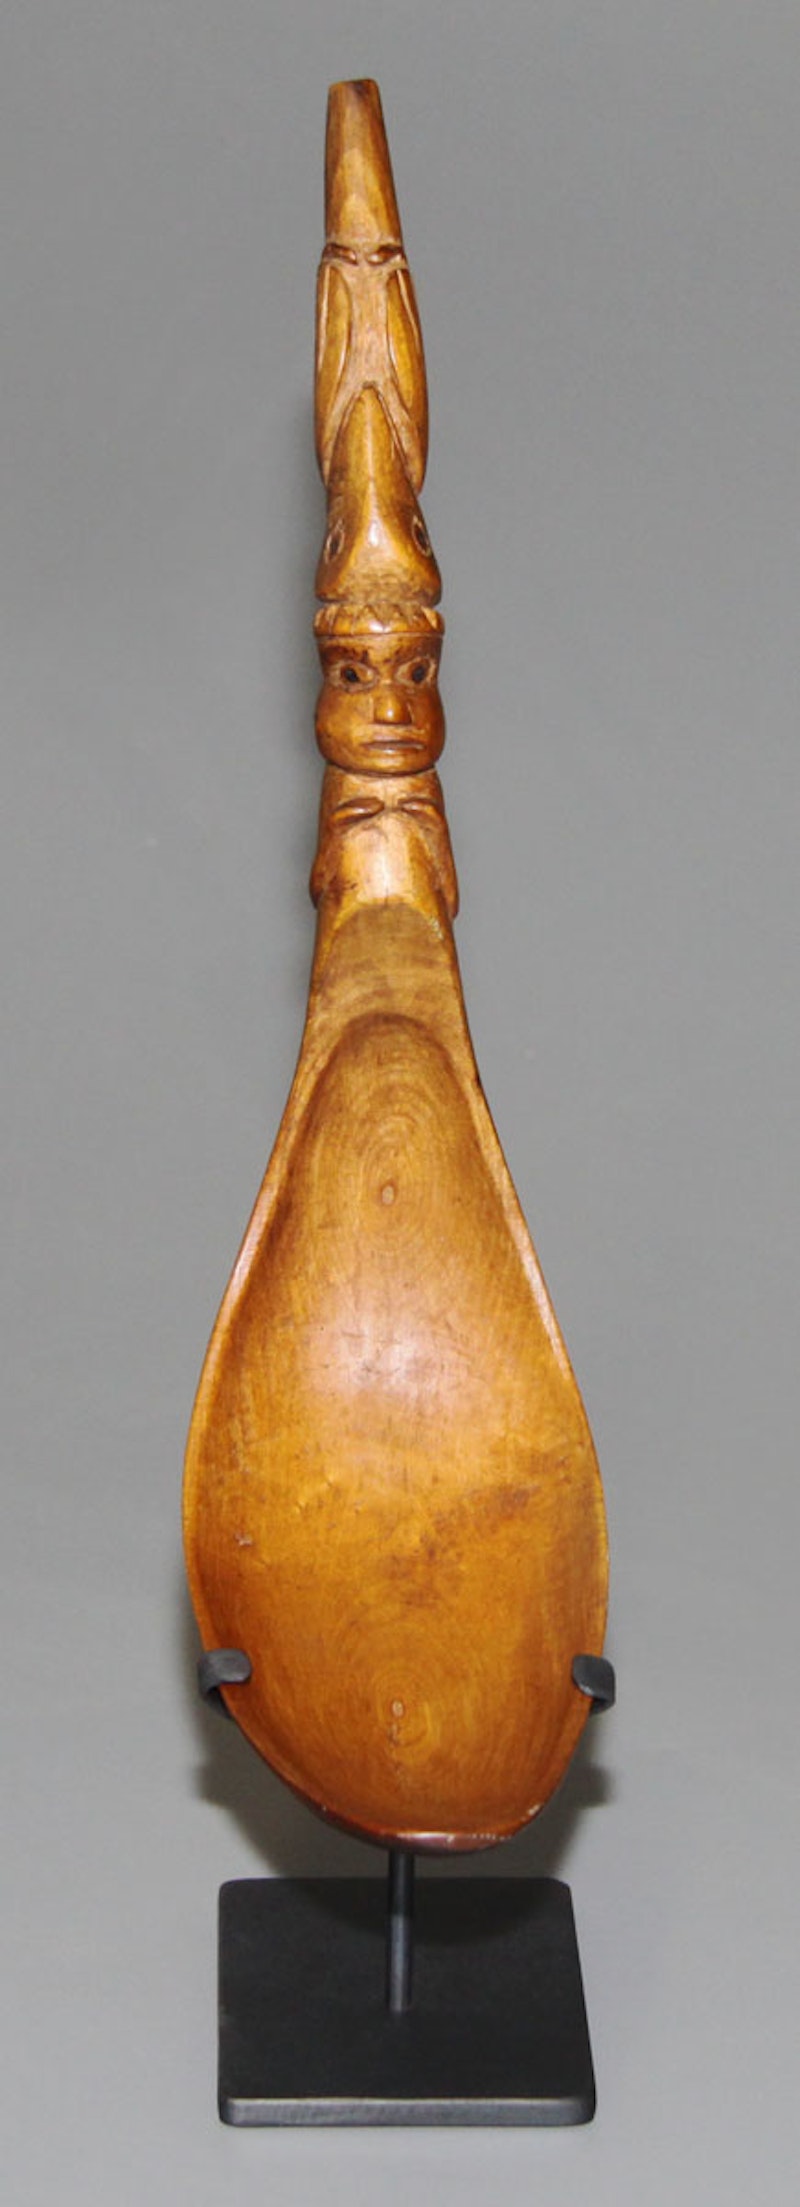 Wooden Spoon with (Raven and Shaman) Thumbnail 2